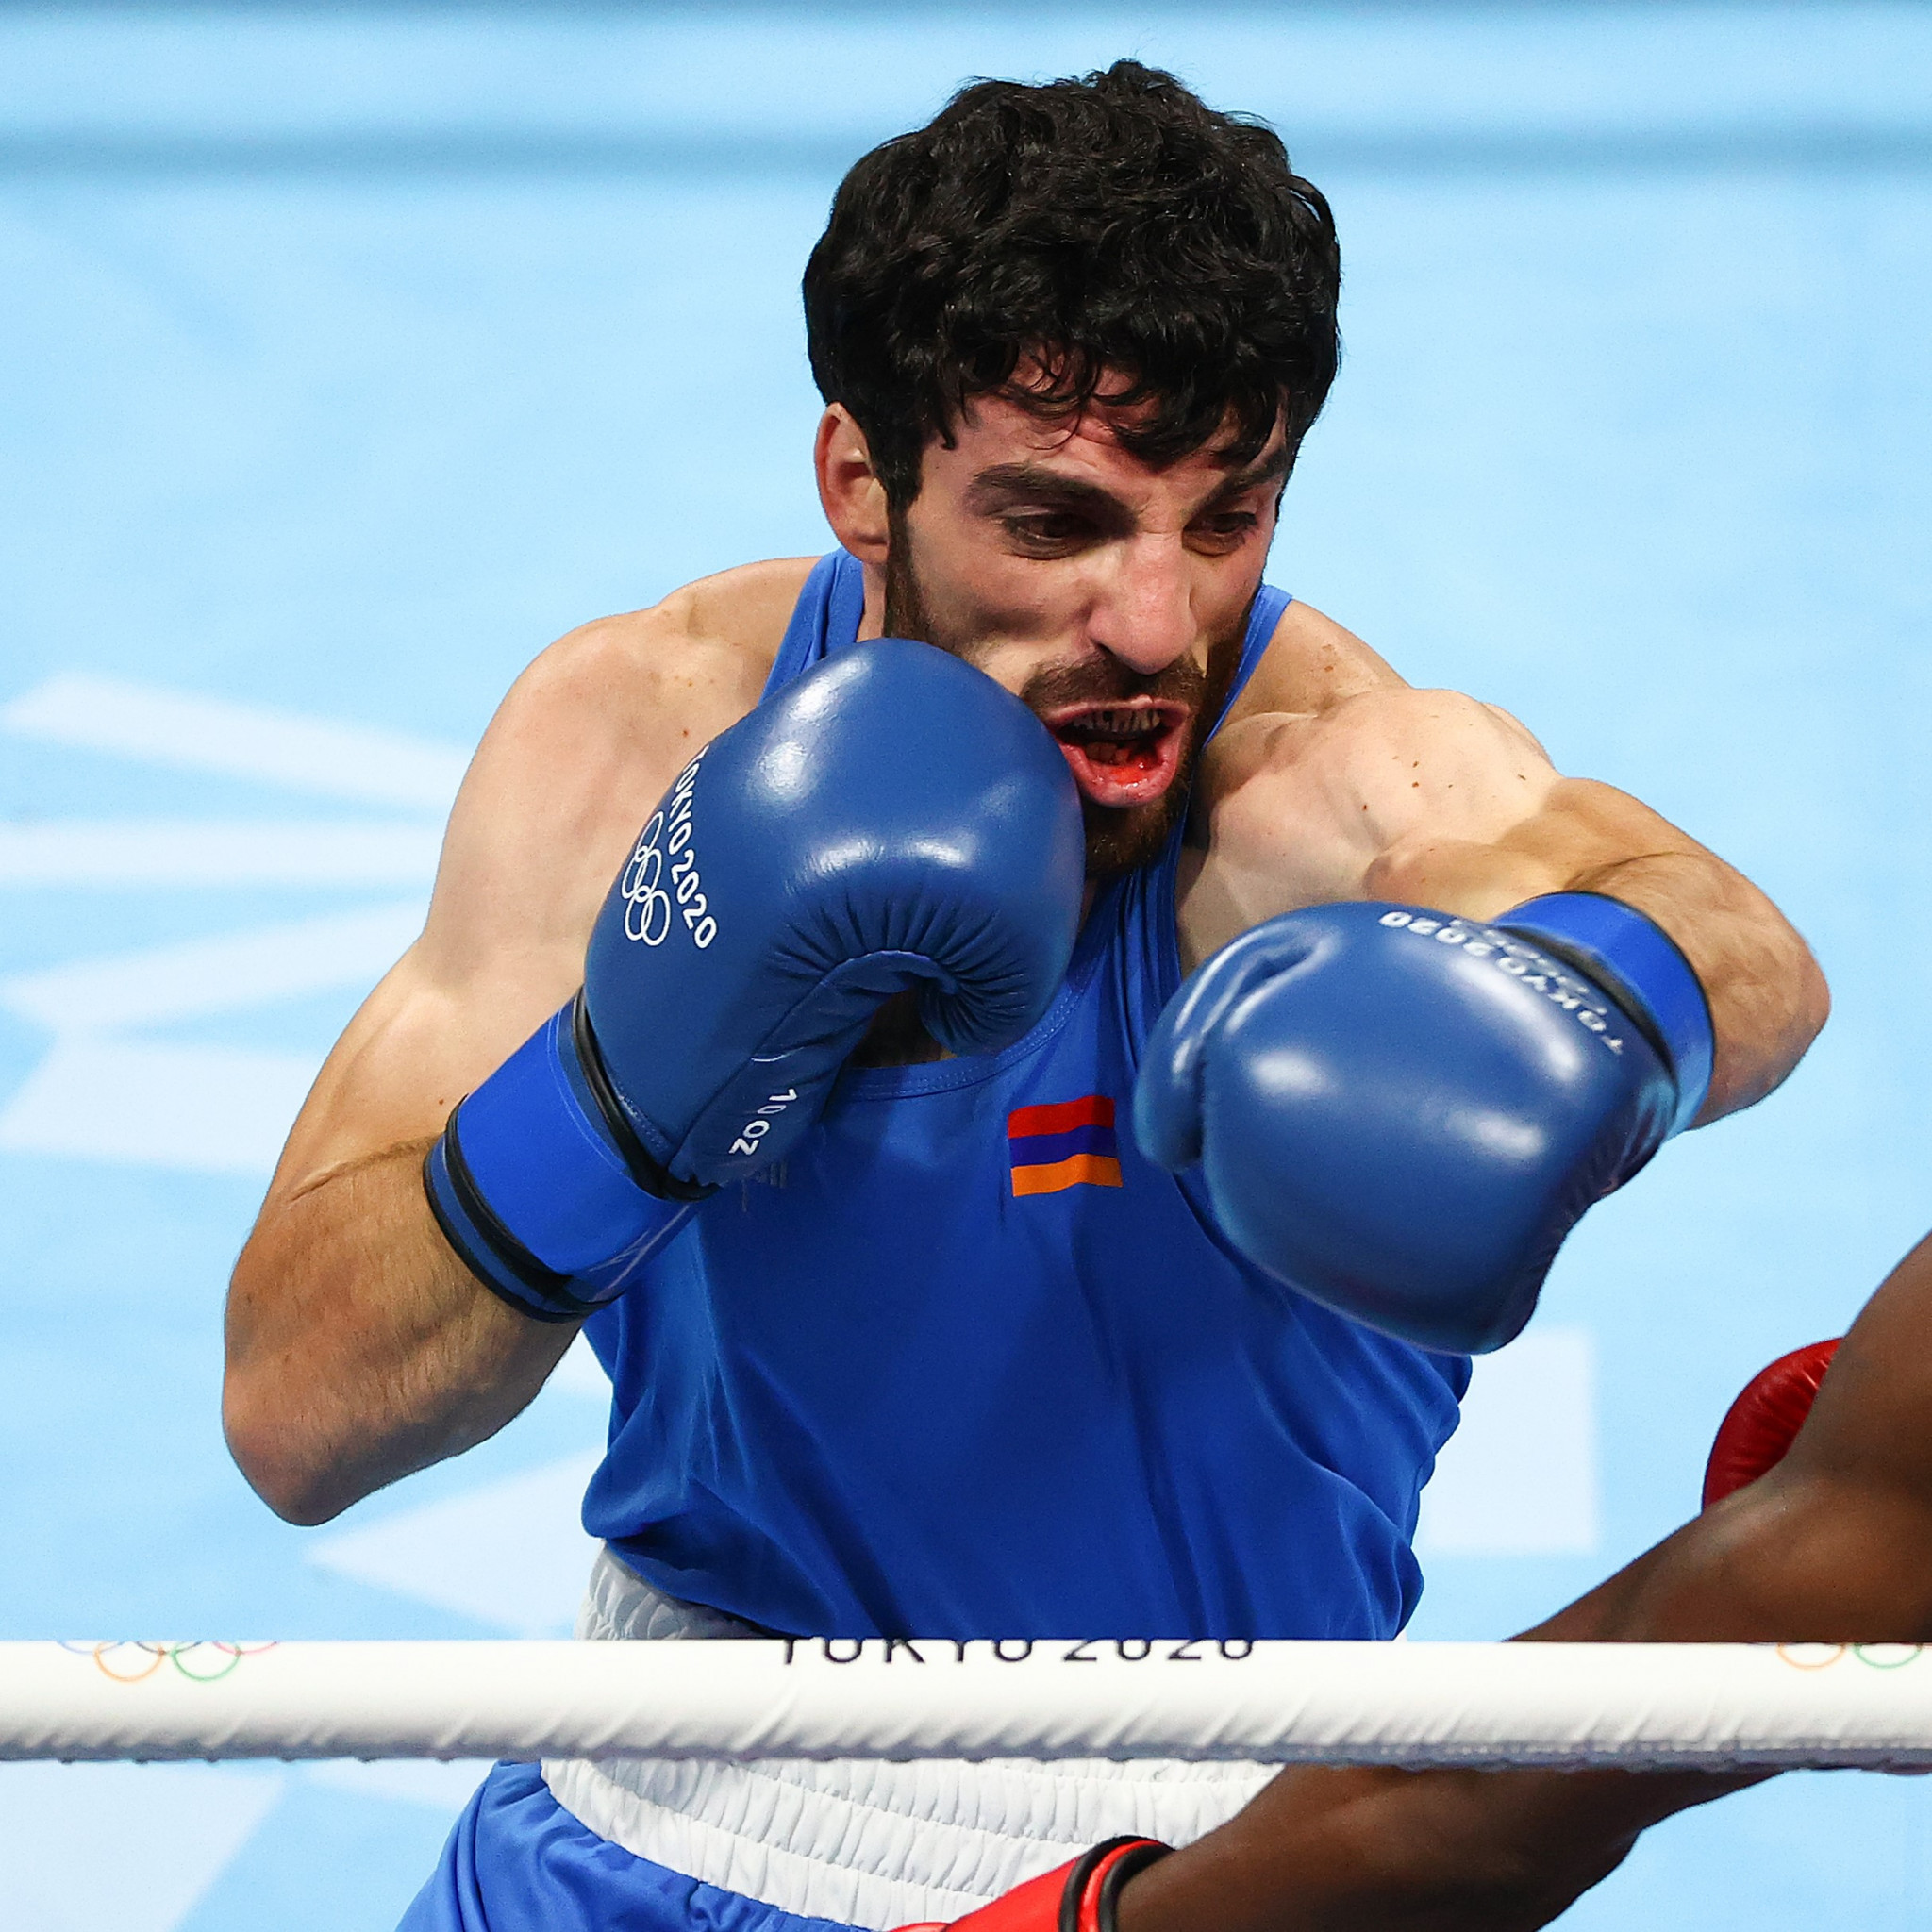 Home lightweight Hovhannes Bachkov, a Tokyo 2020 bronze medallist, will meet England's Joe Tyers for a quarter-final place at the EUBC Championships being held in Yerevan, Armenia ©Getty Images